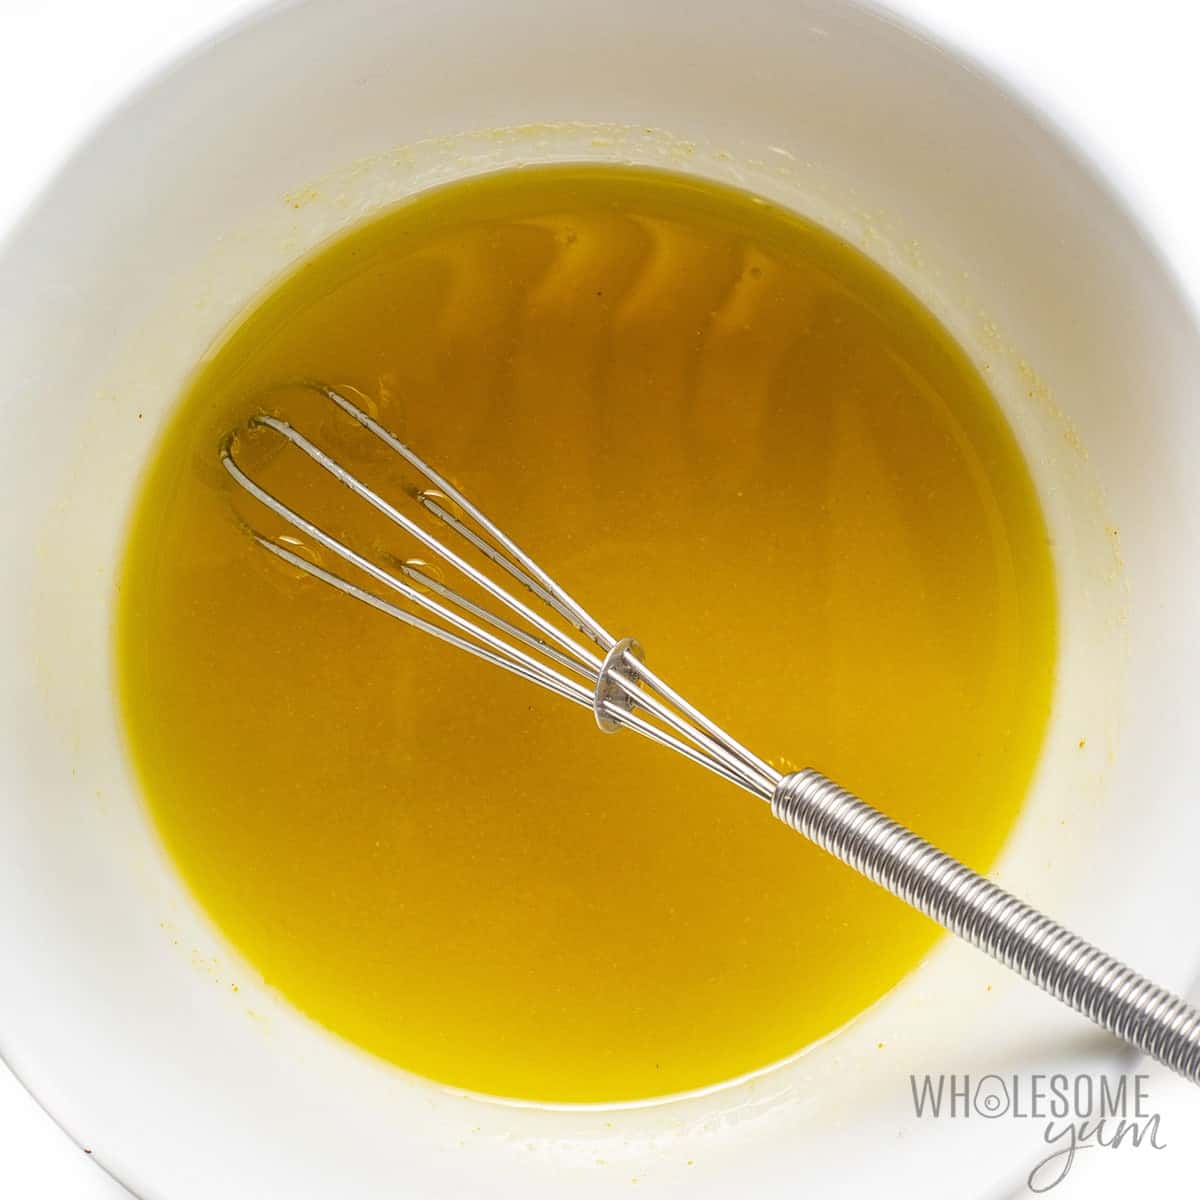 Oil mixture in a small bowl.